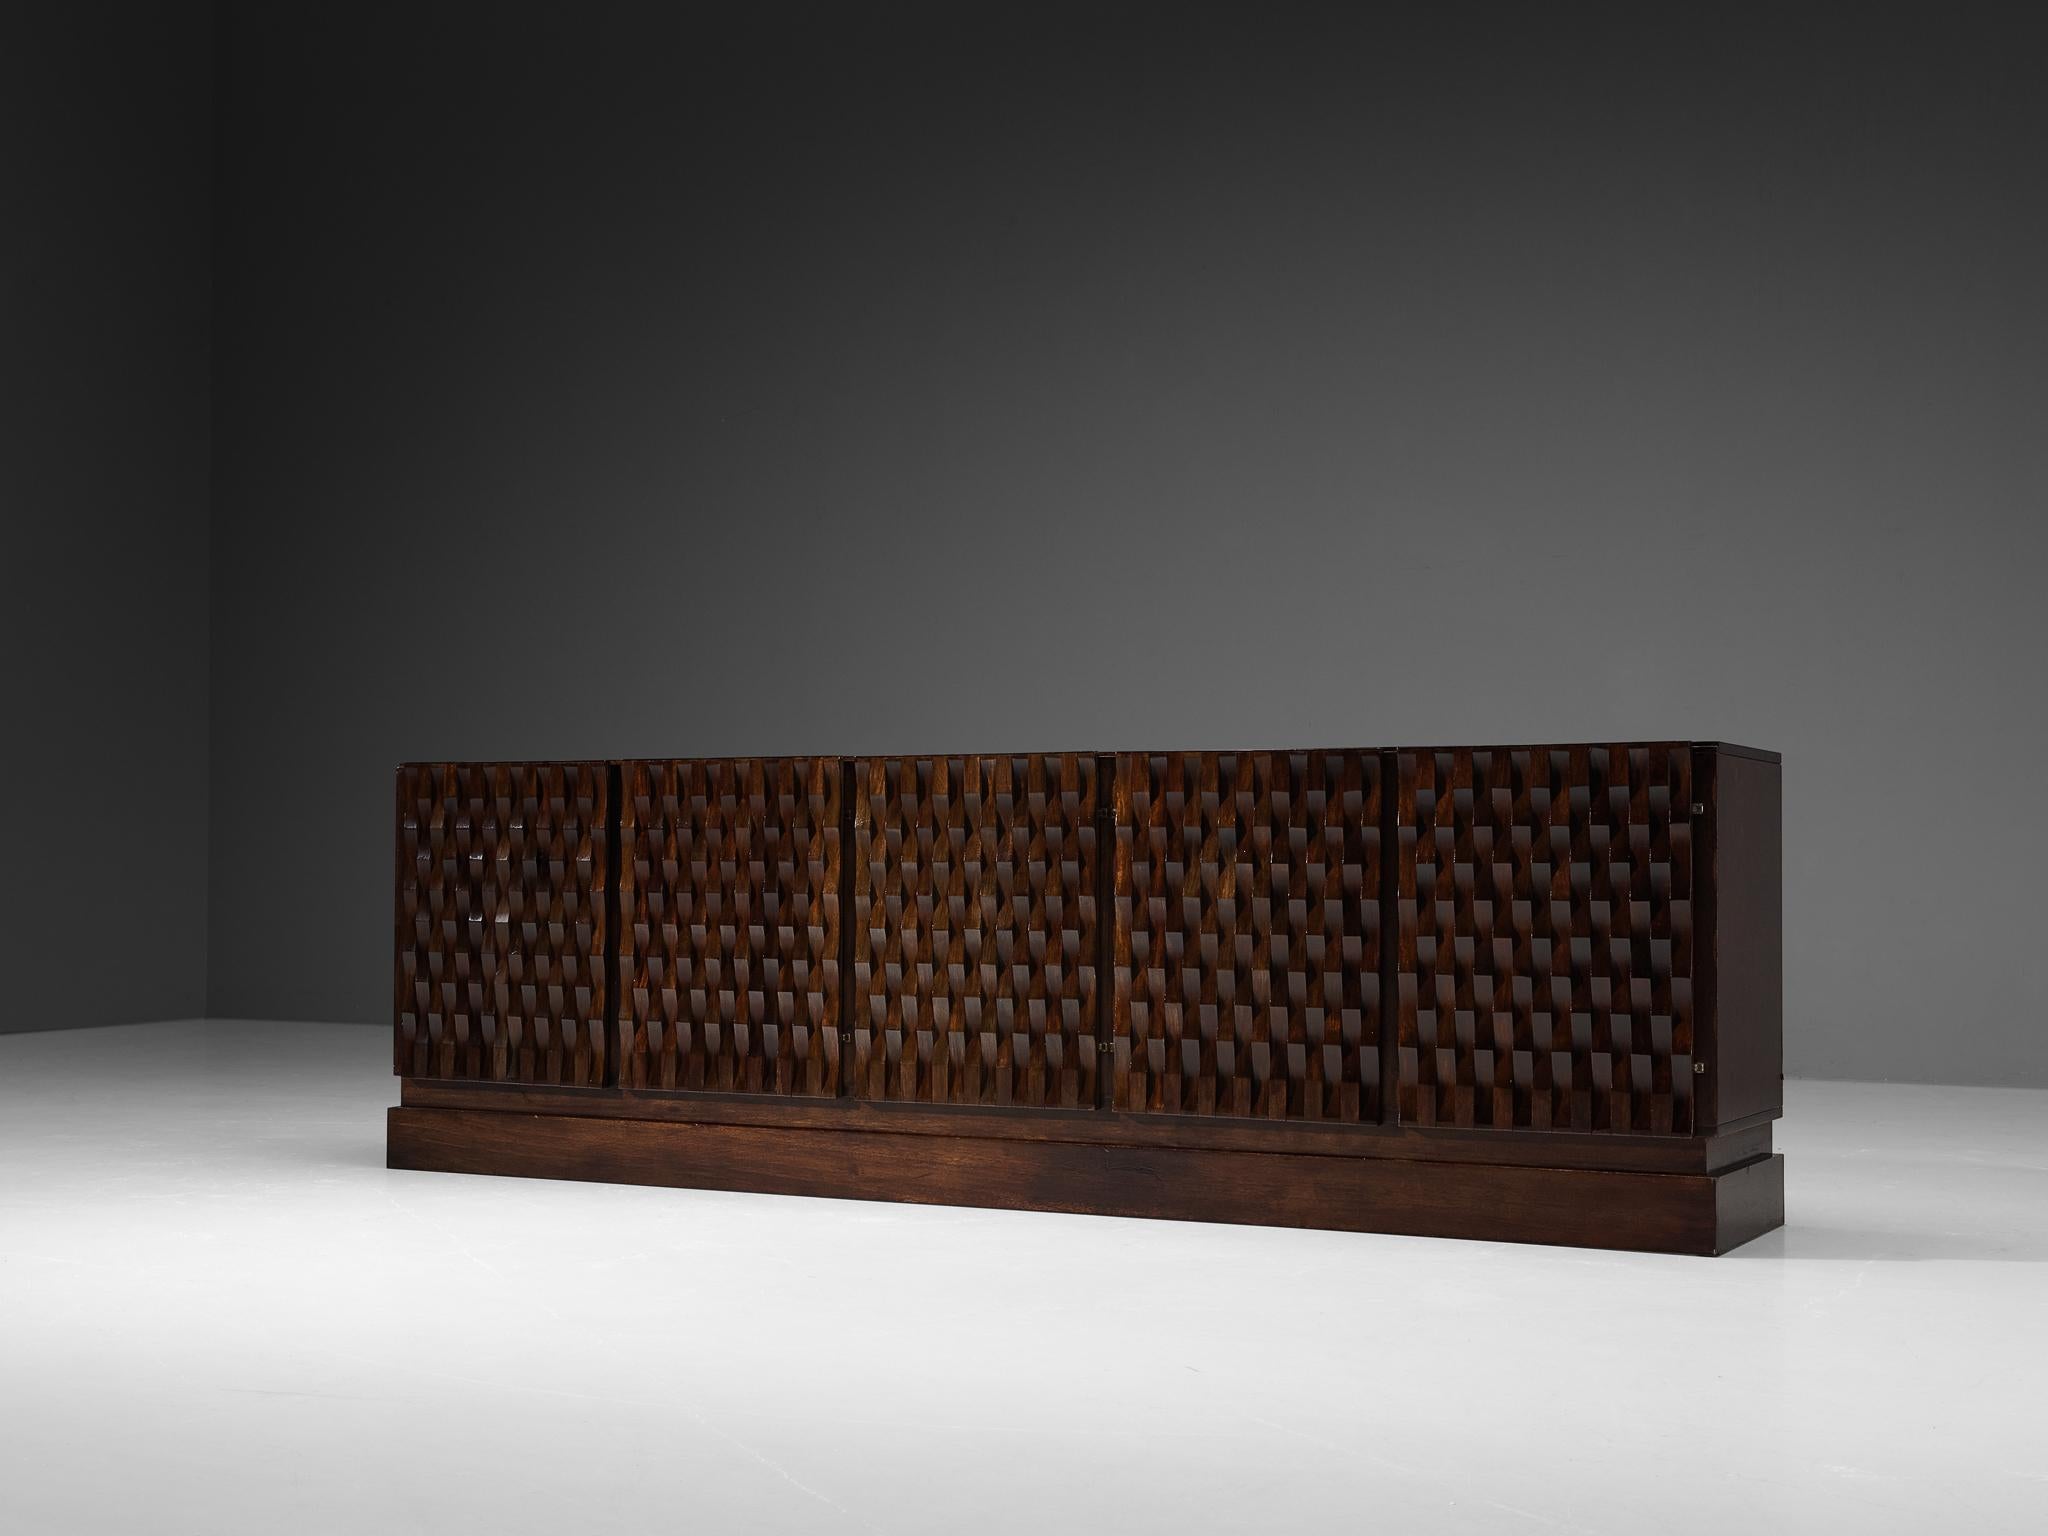 De Coene, sideboard or credenza, stained oak, interior oak, Belgium, 1970s.

This very evocative sideboard by De Coene features a clear rhythm and flow established by means of a well thought through lay out that is utterly well-balanced. The